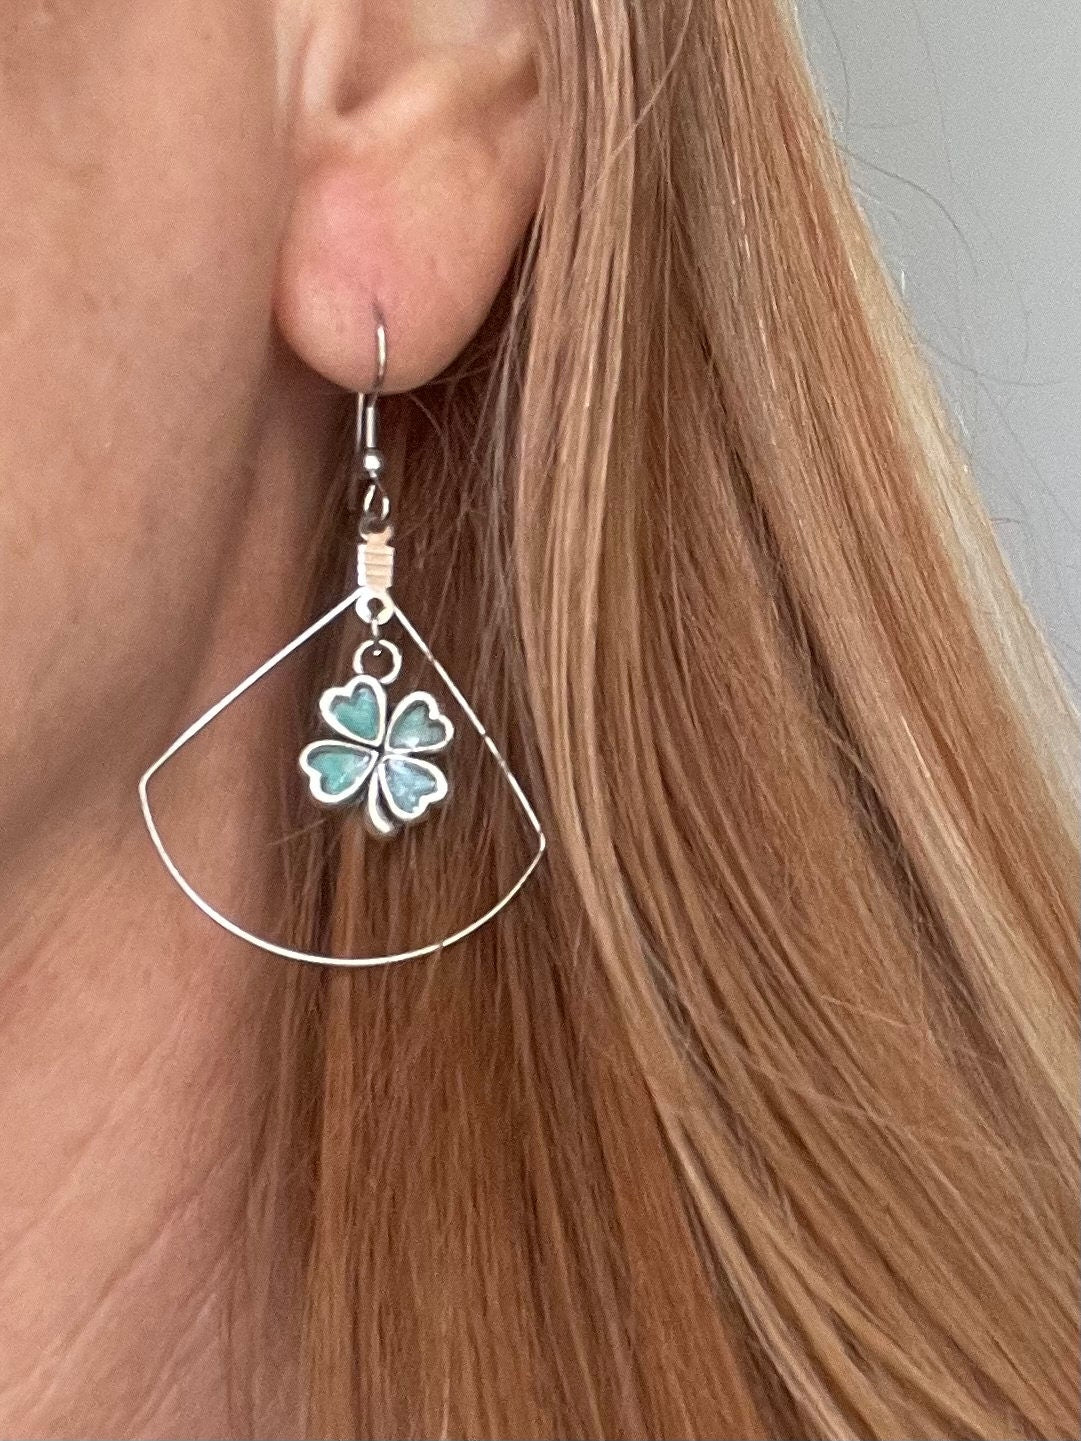 Green Four Leaf Clover Dangle Earrings great for Saint Patrick's Day or Anytime You Can Use Some Extra Luck 🍀